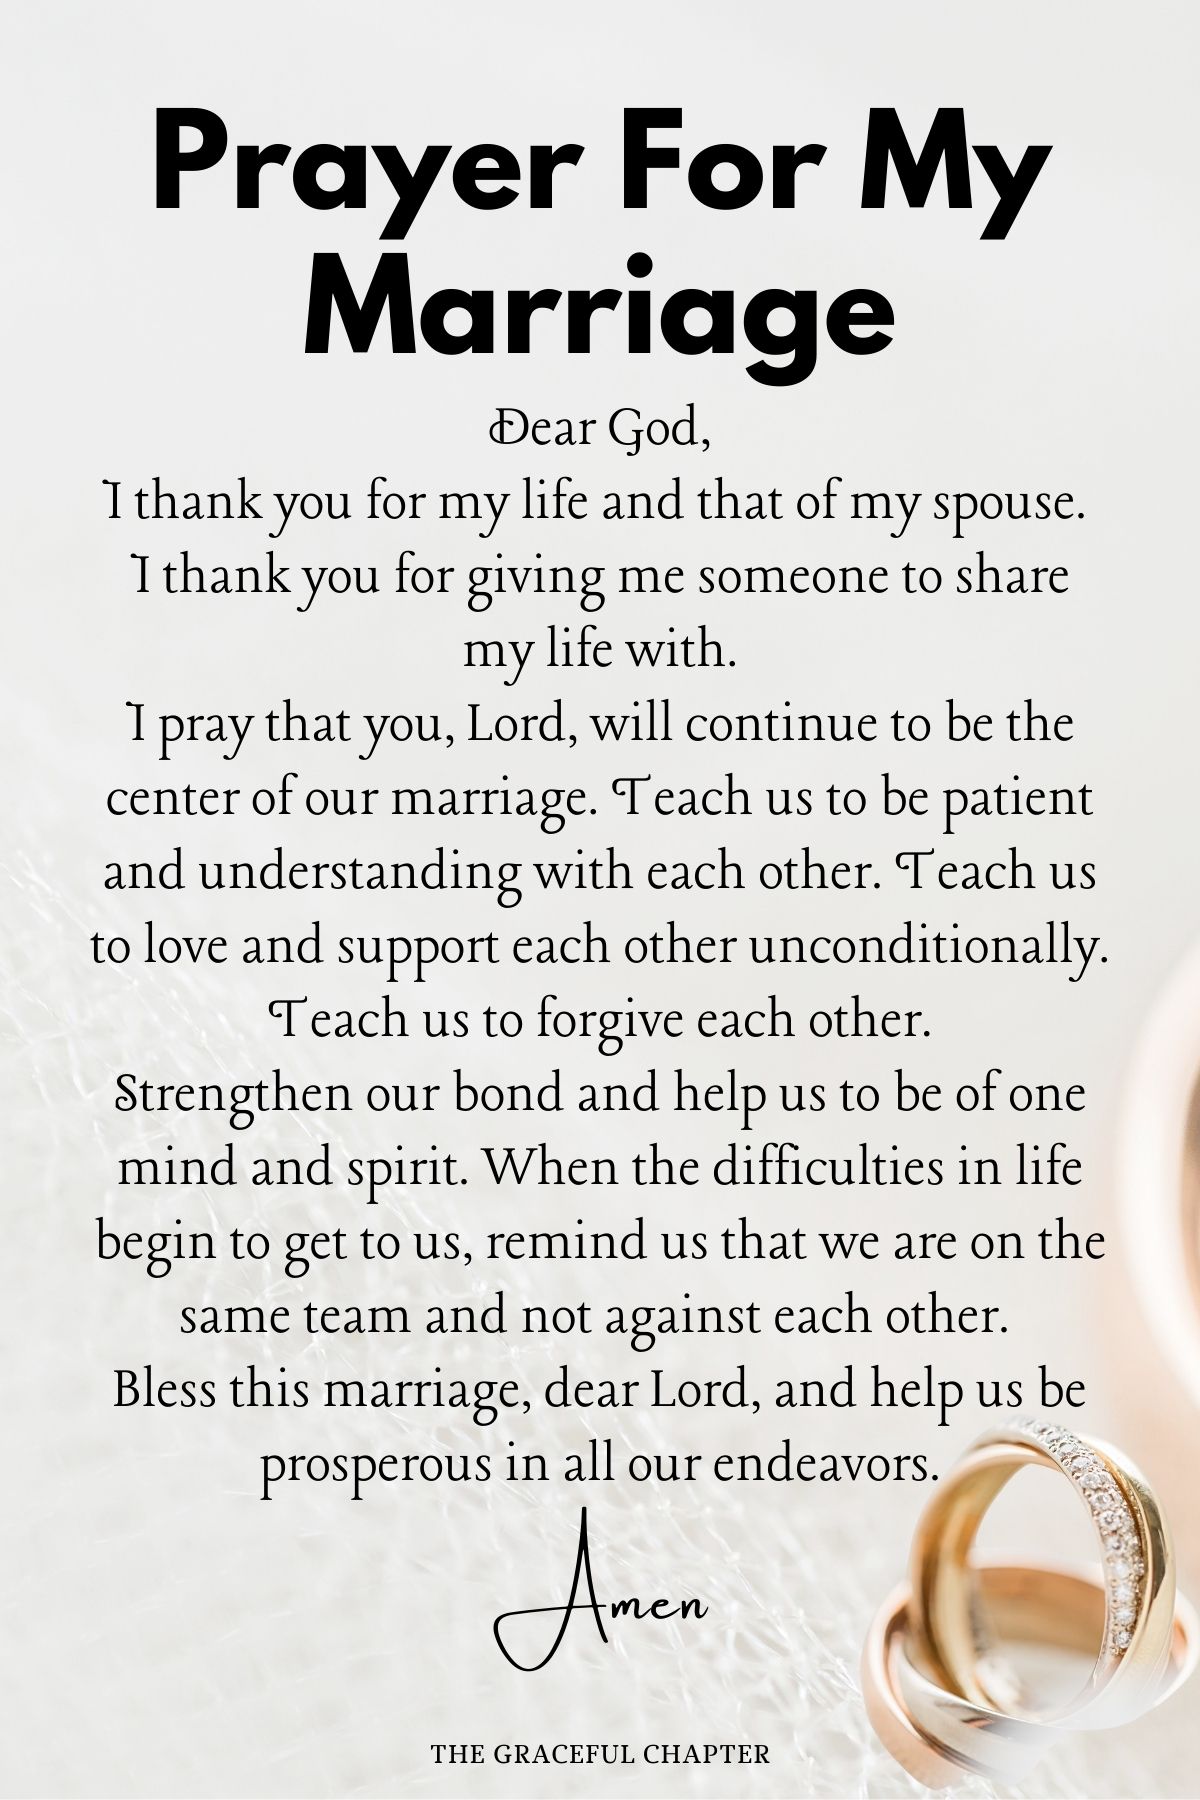 Prayer for my marriage